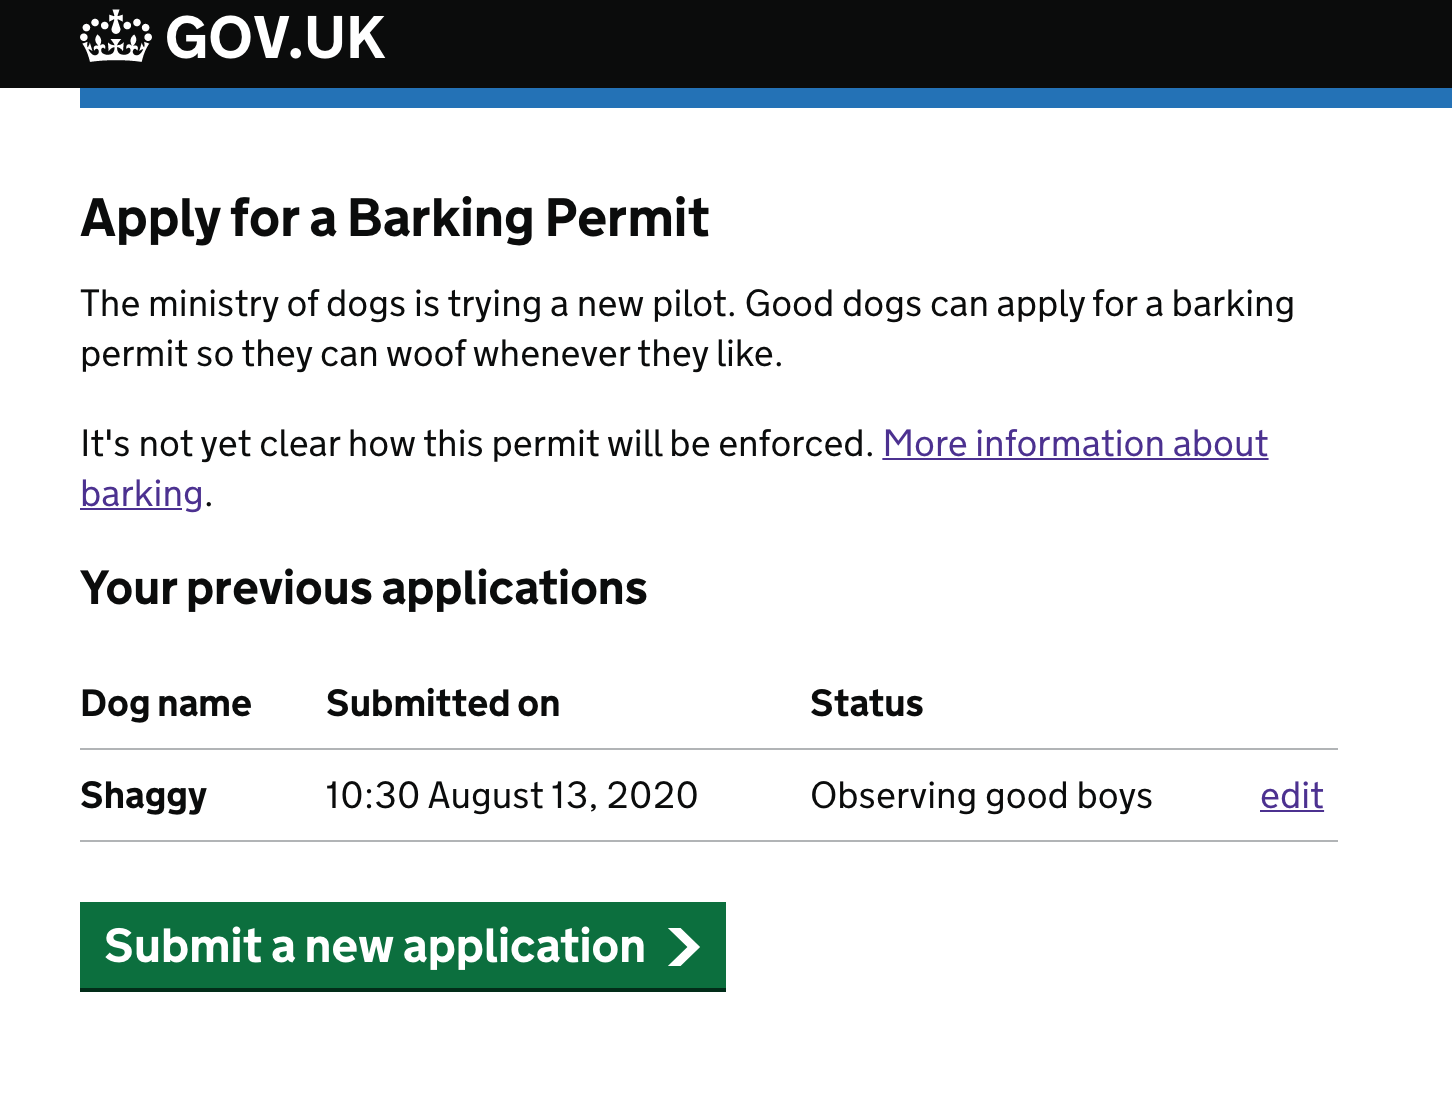 Screenshot of the service, showing one previous application in the state “observing good boys”.